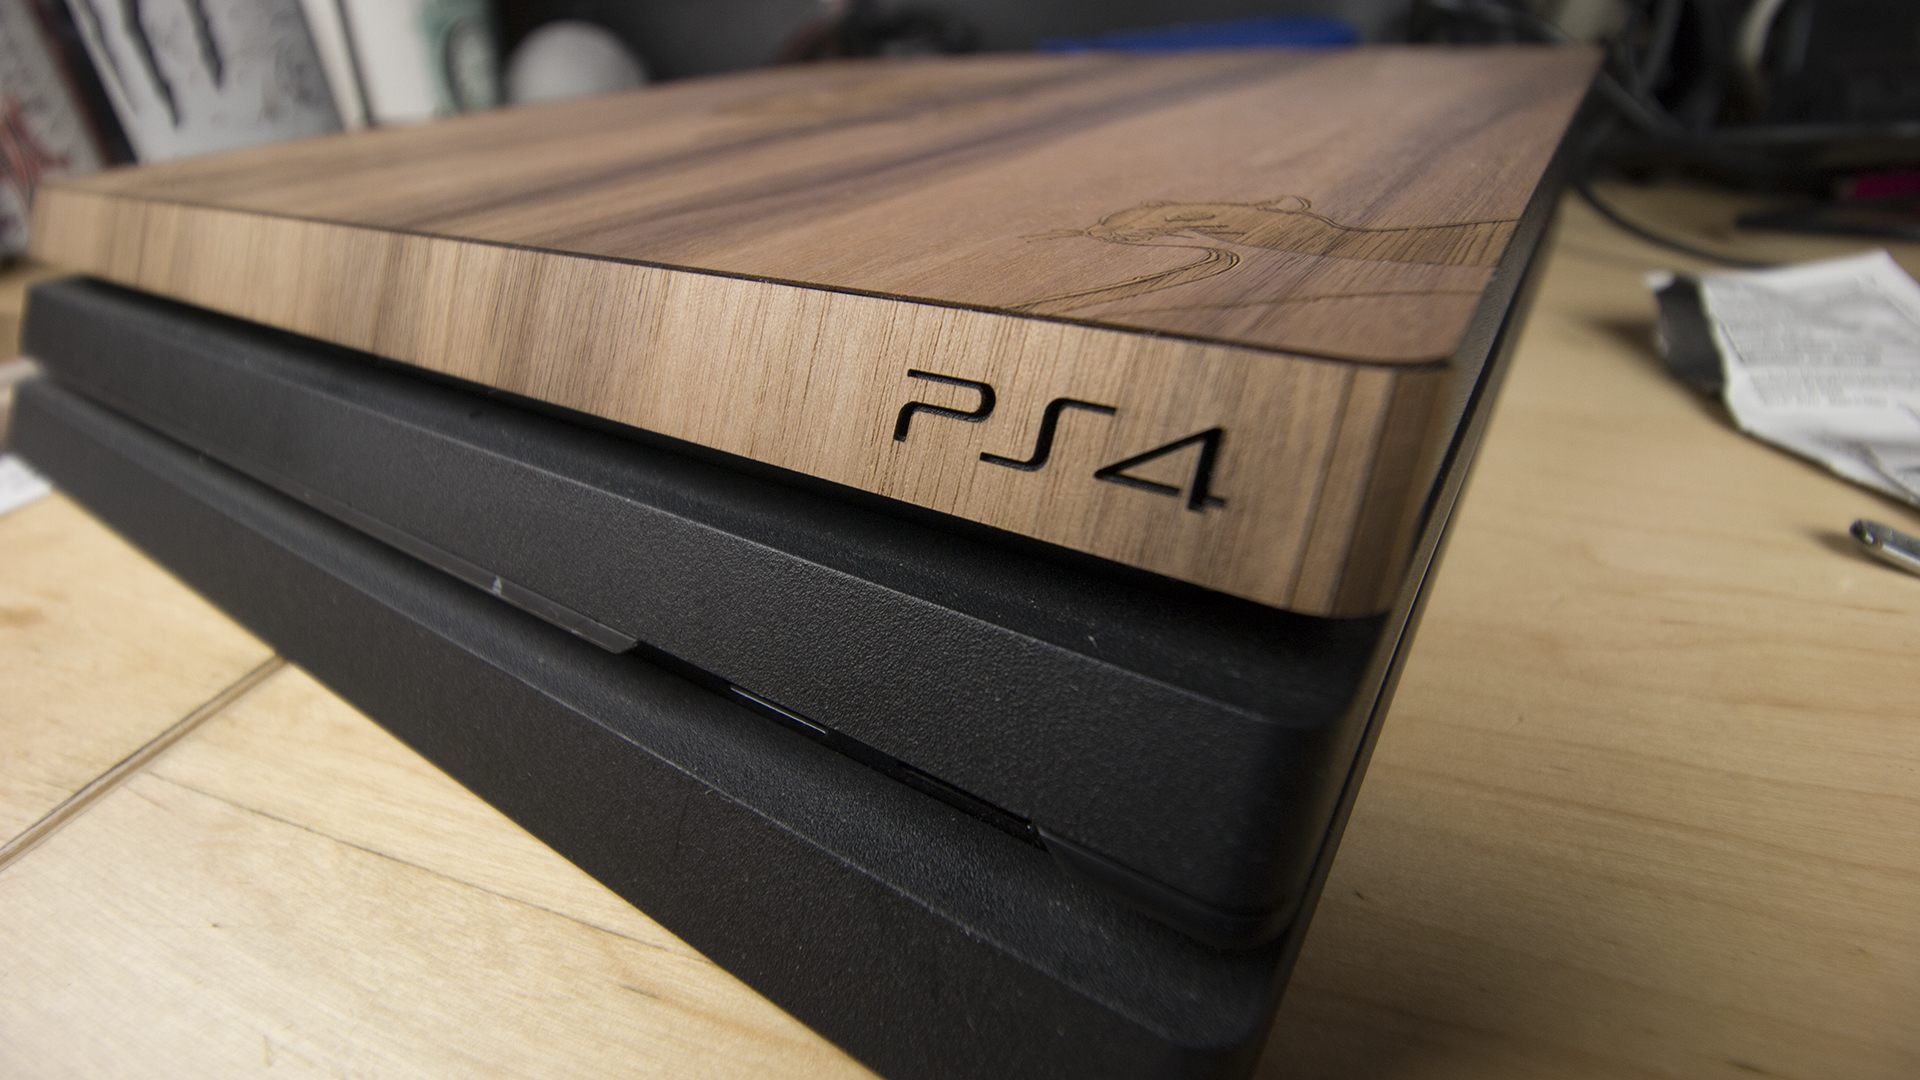 Wrapping My PlayStation 4 In Wood